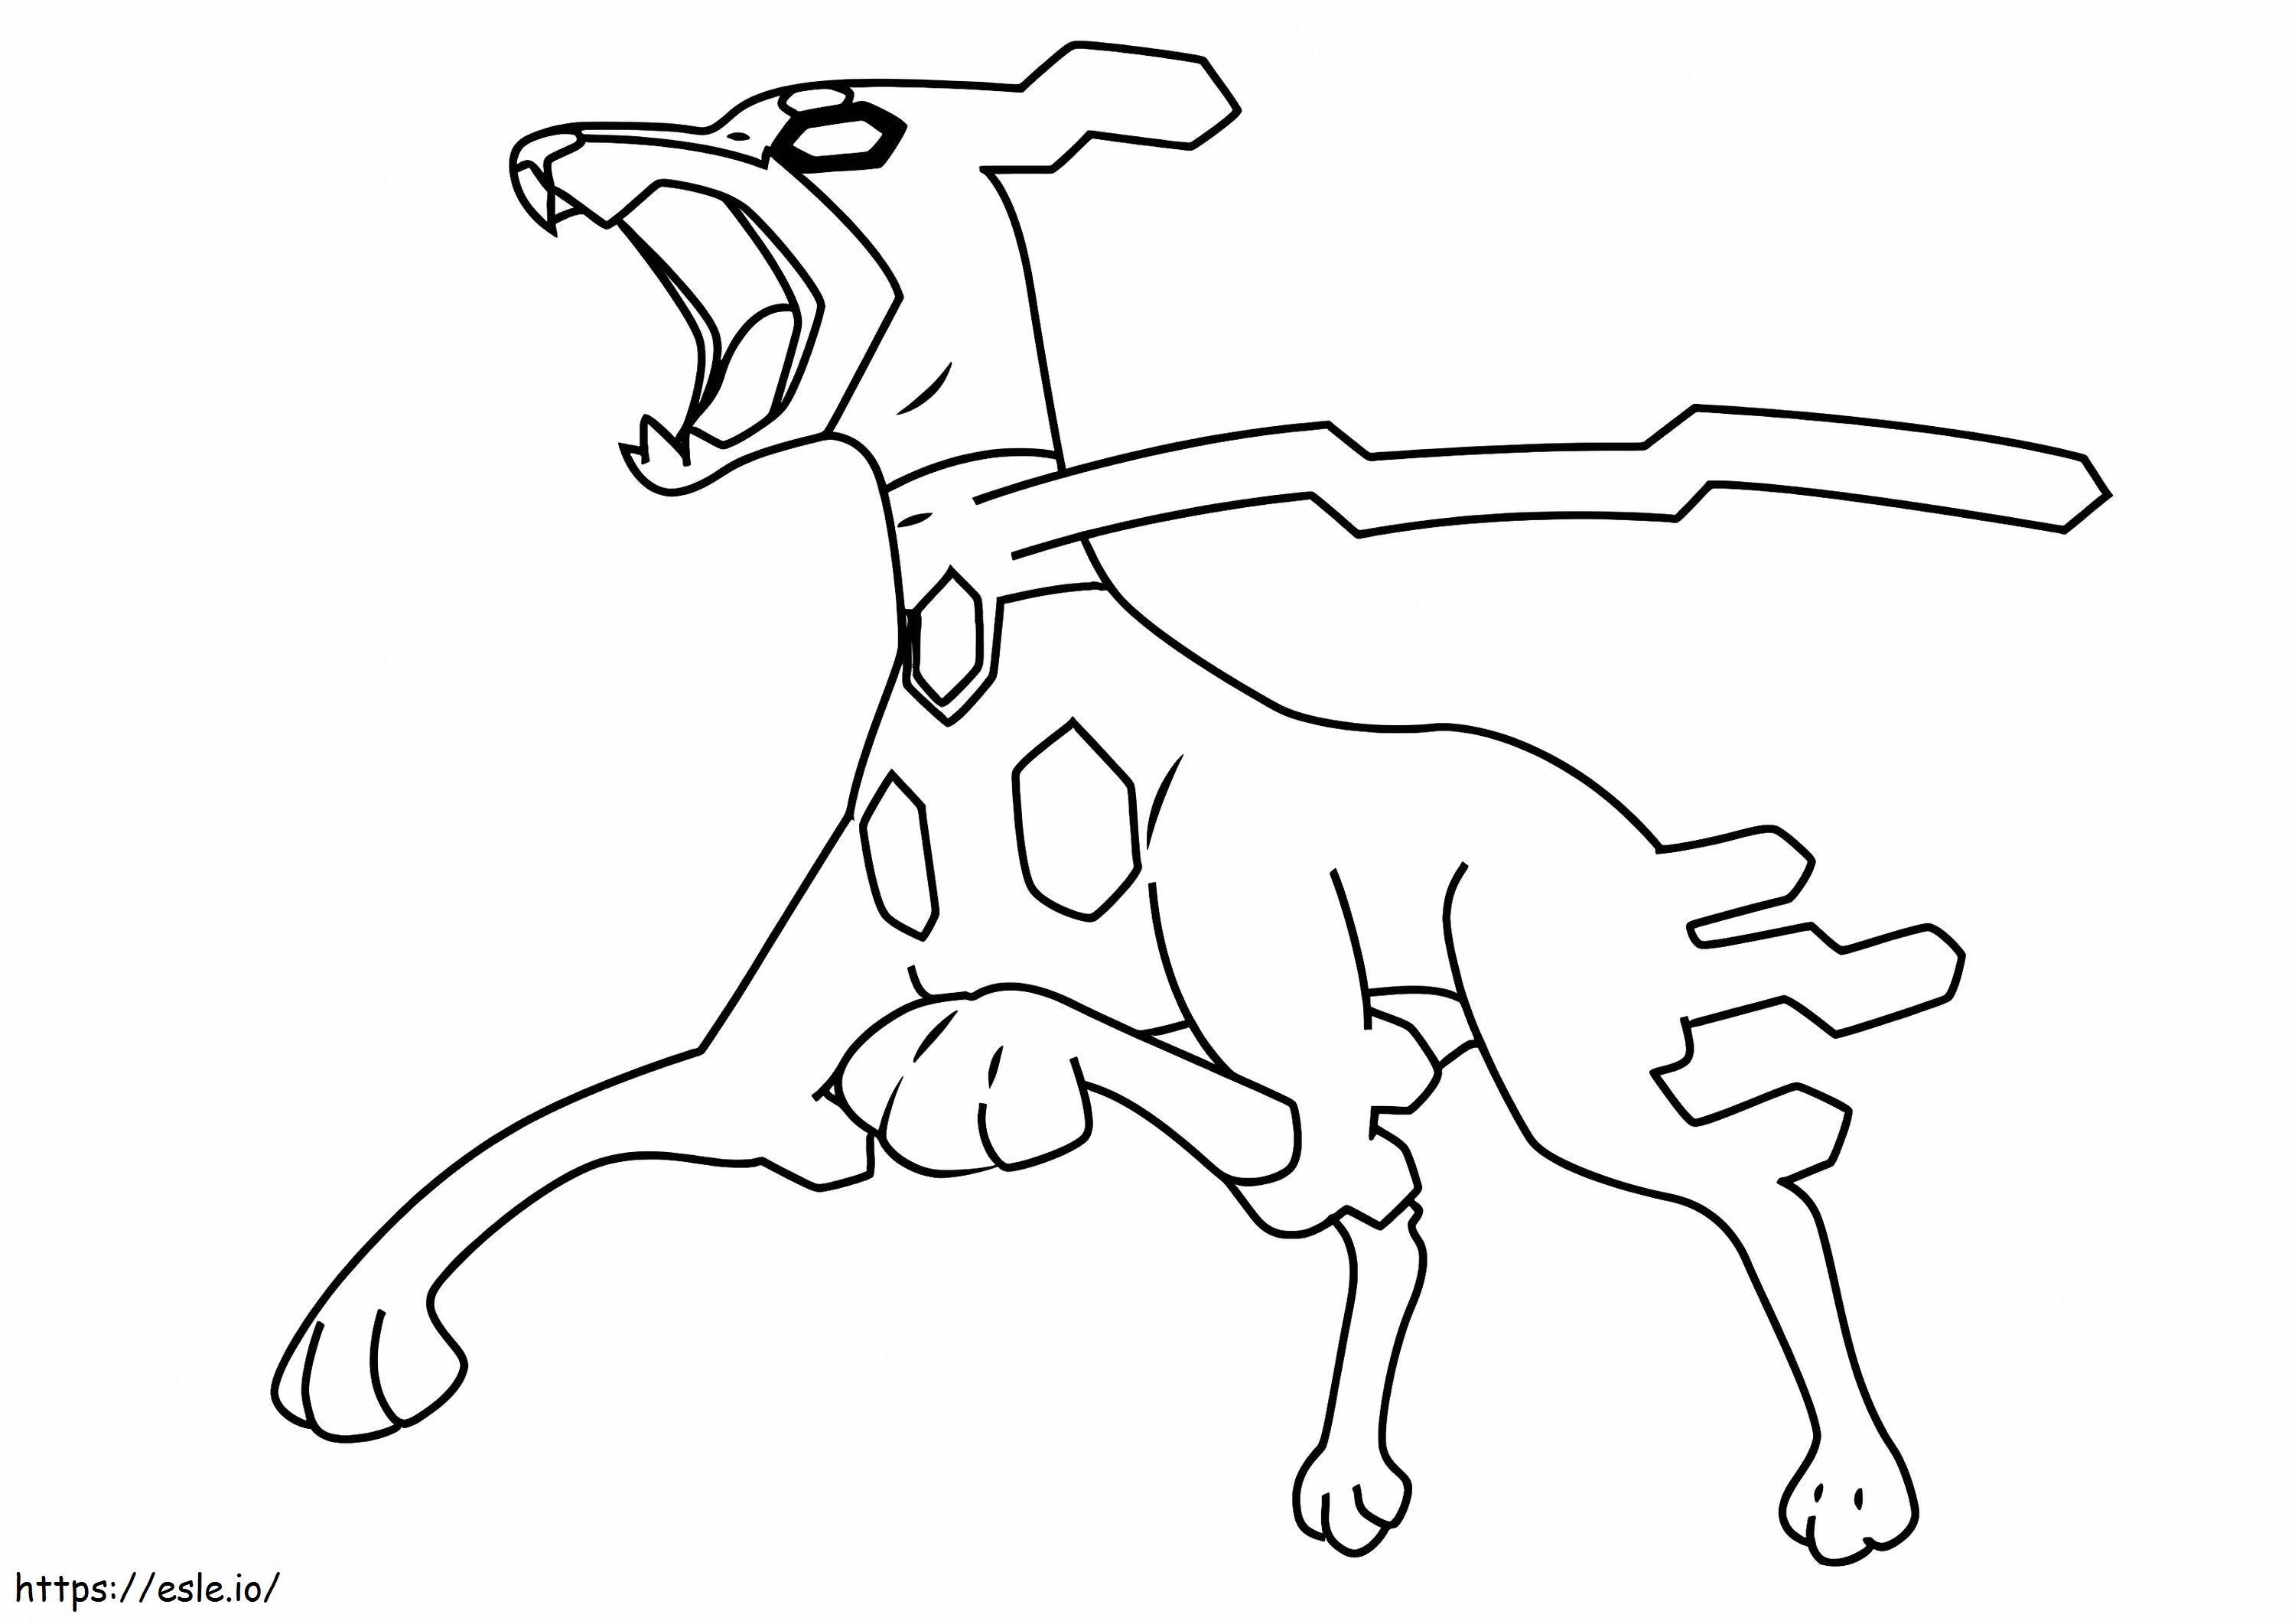 1561458336_Zyagrde_10_Form coloring page